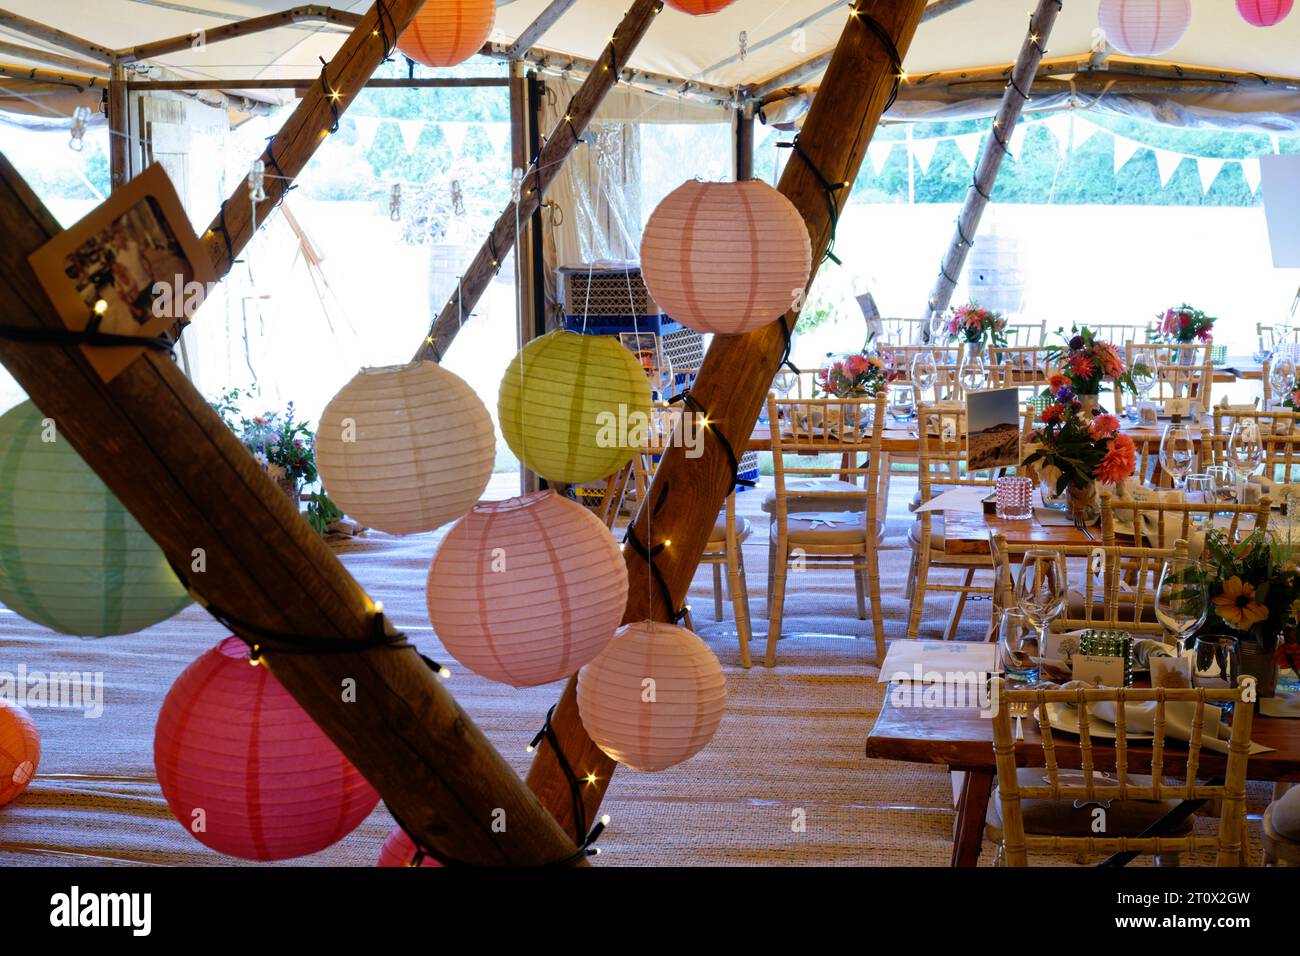 Wedding marquee decorated and ready for the guests to arrive. Tables, chairs, flowers and place settings. A rustic teepee design of tent. Stock Photo